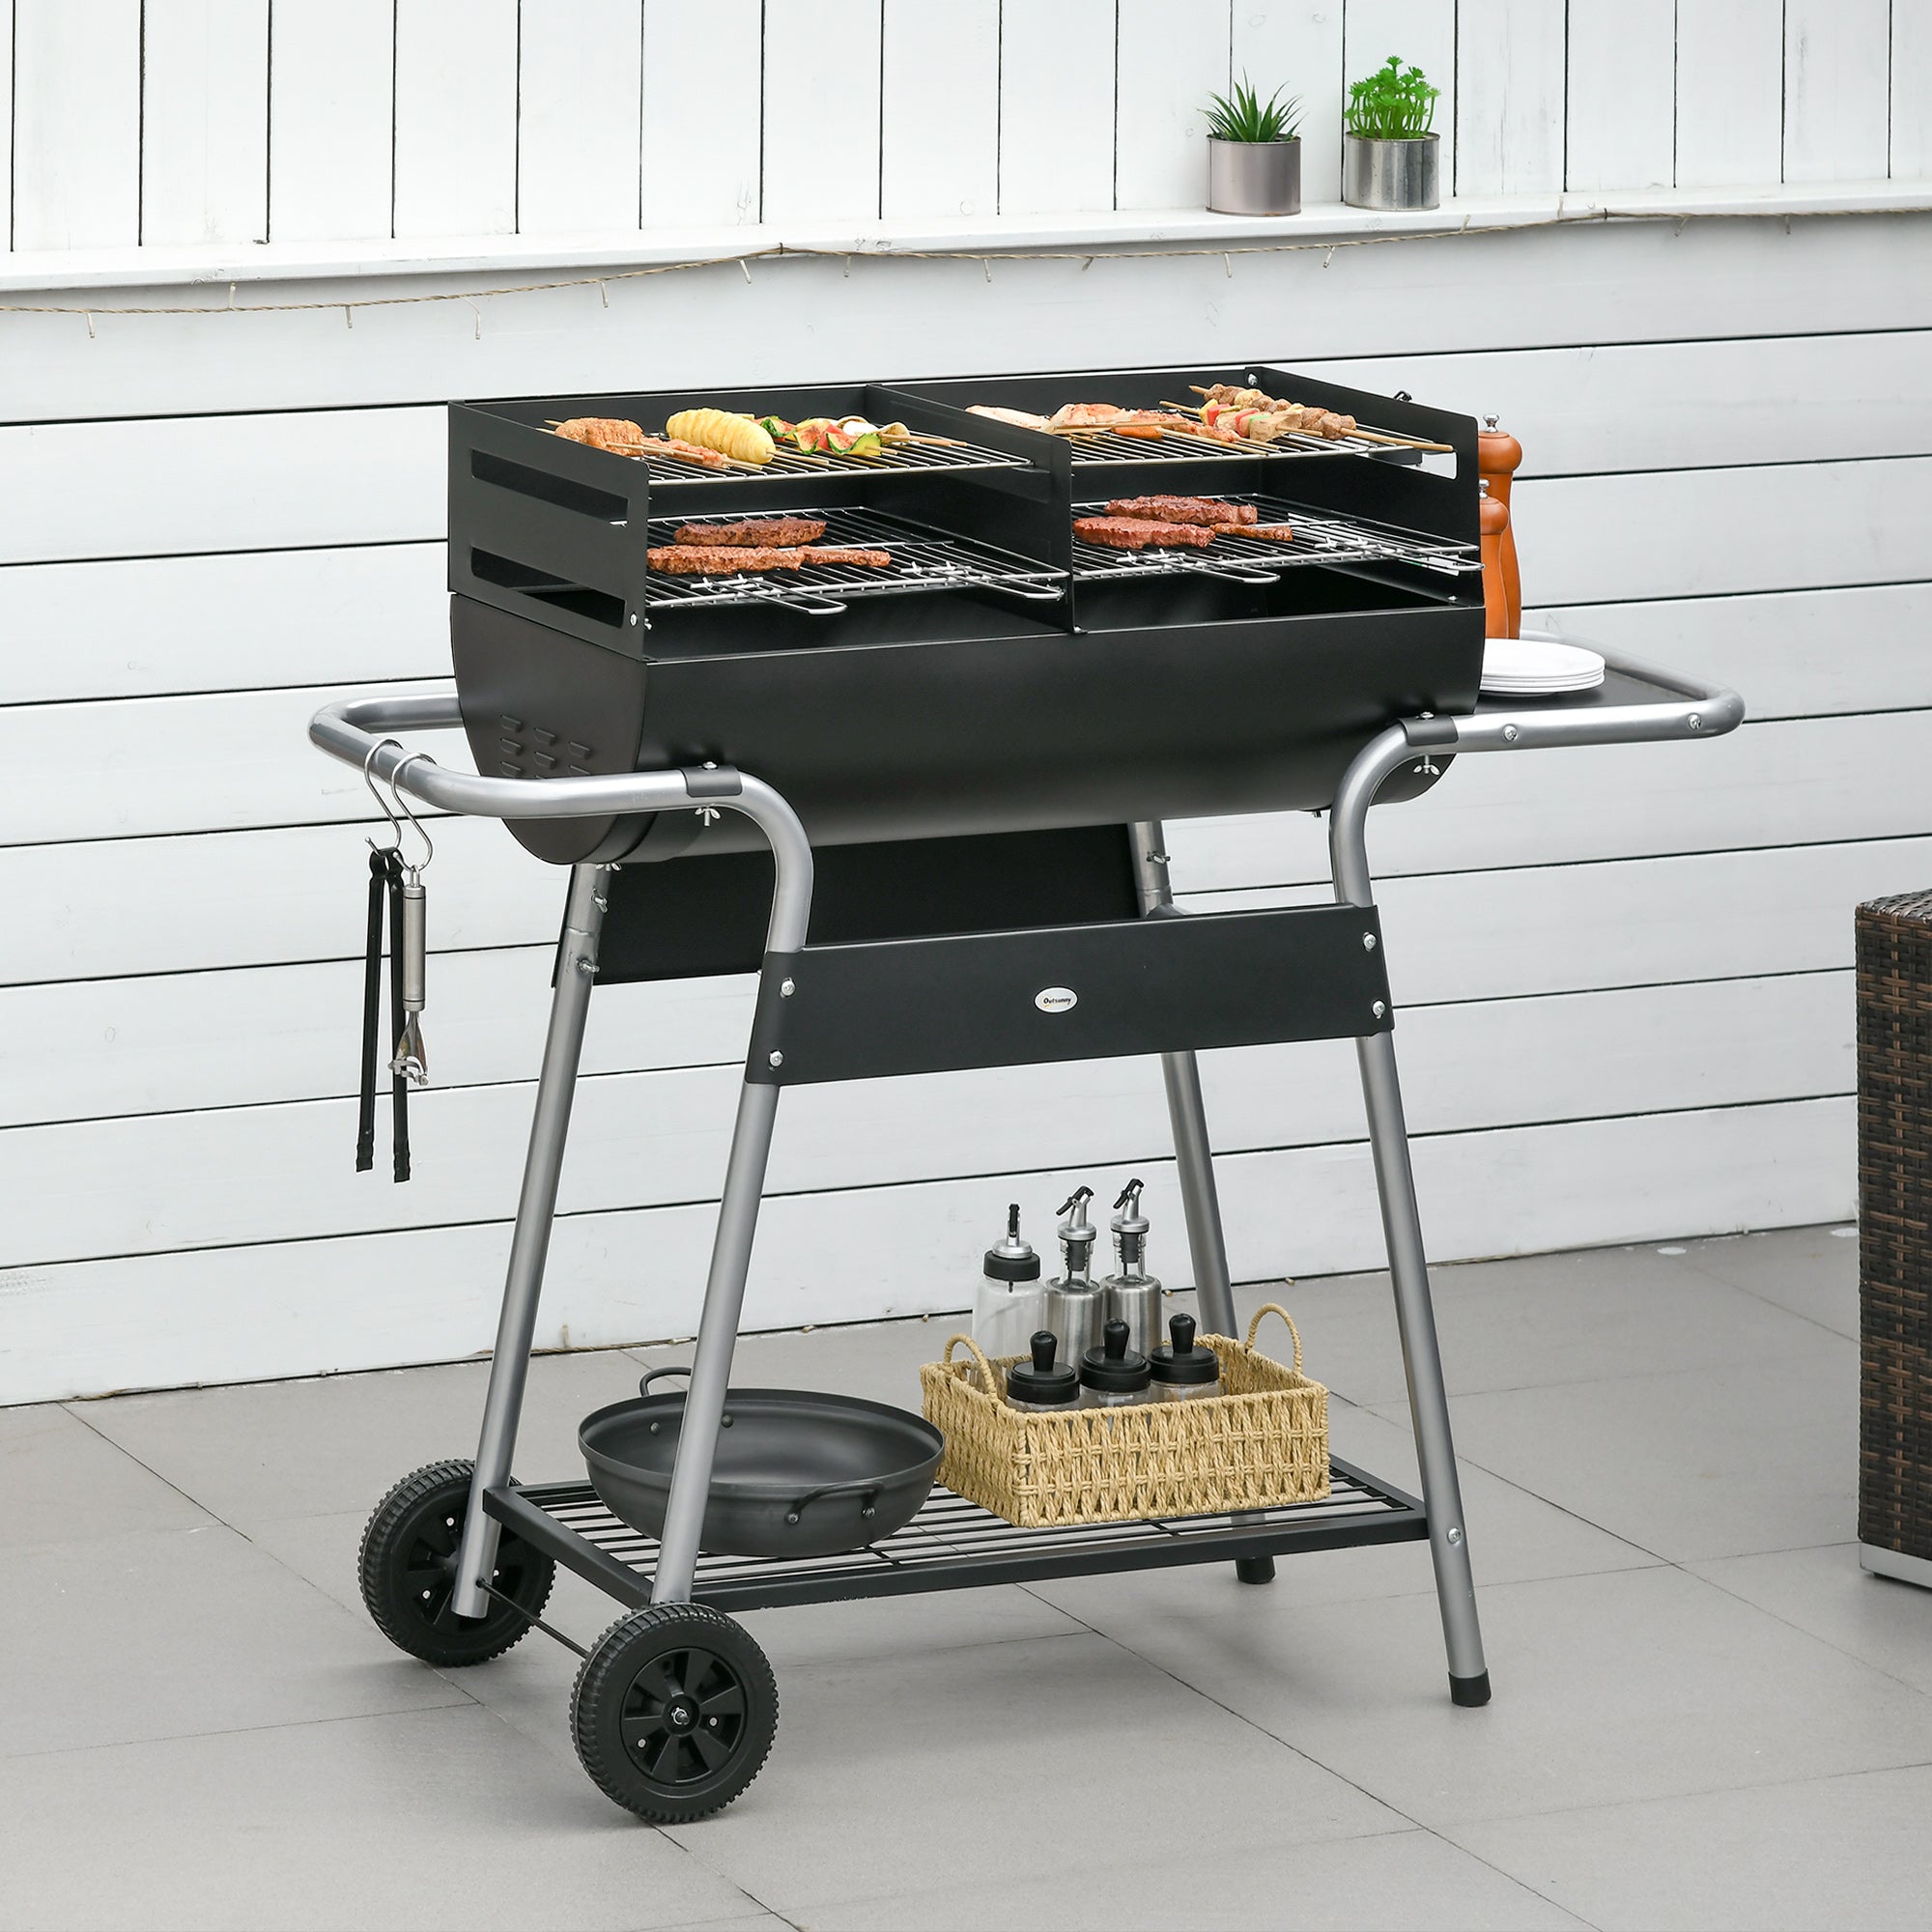 Outsunny Charcoal Barbecue Grill Garden BBQ Trolley w/ Adjustable Grill Height, Double Grill, Side Table, Storage Shelf and Wheels, Black